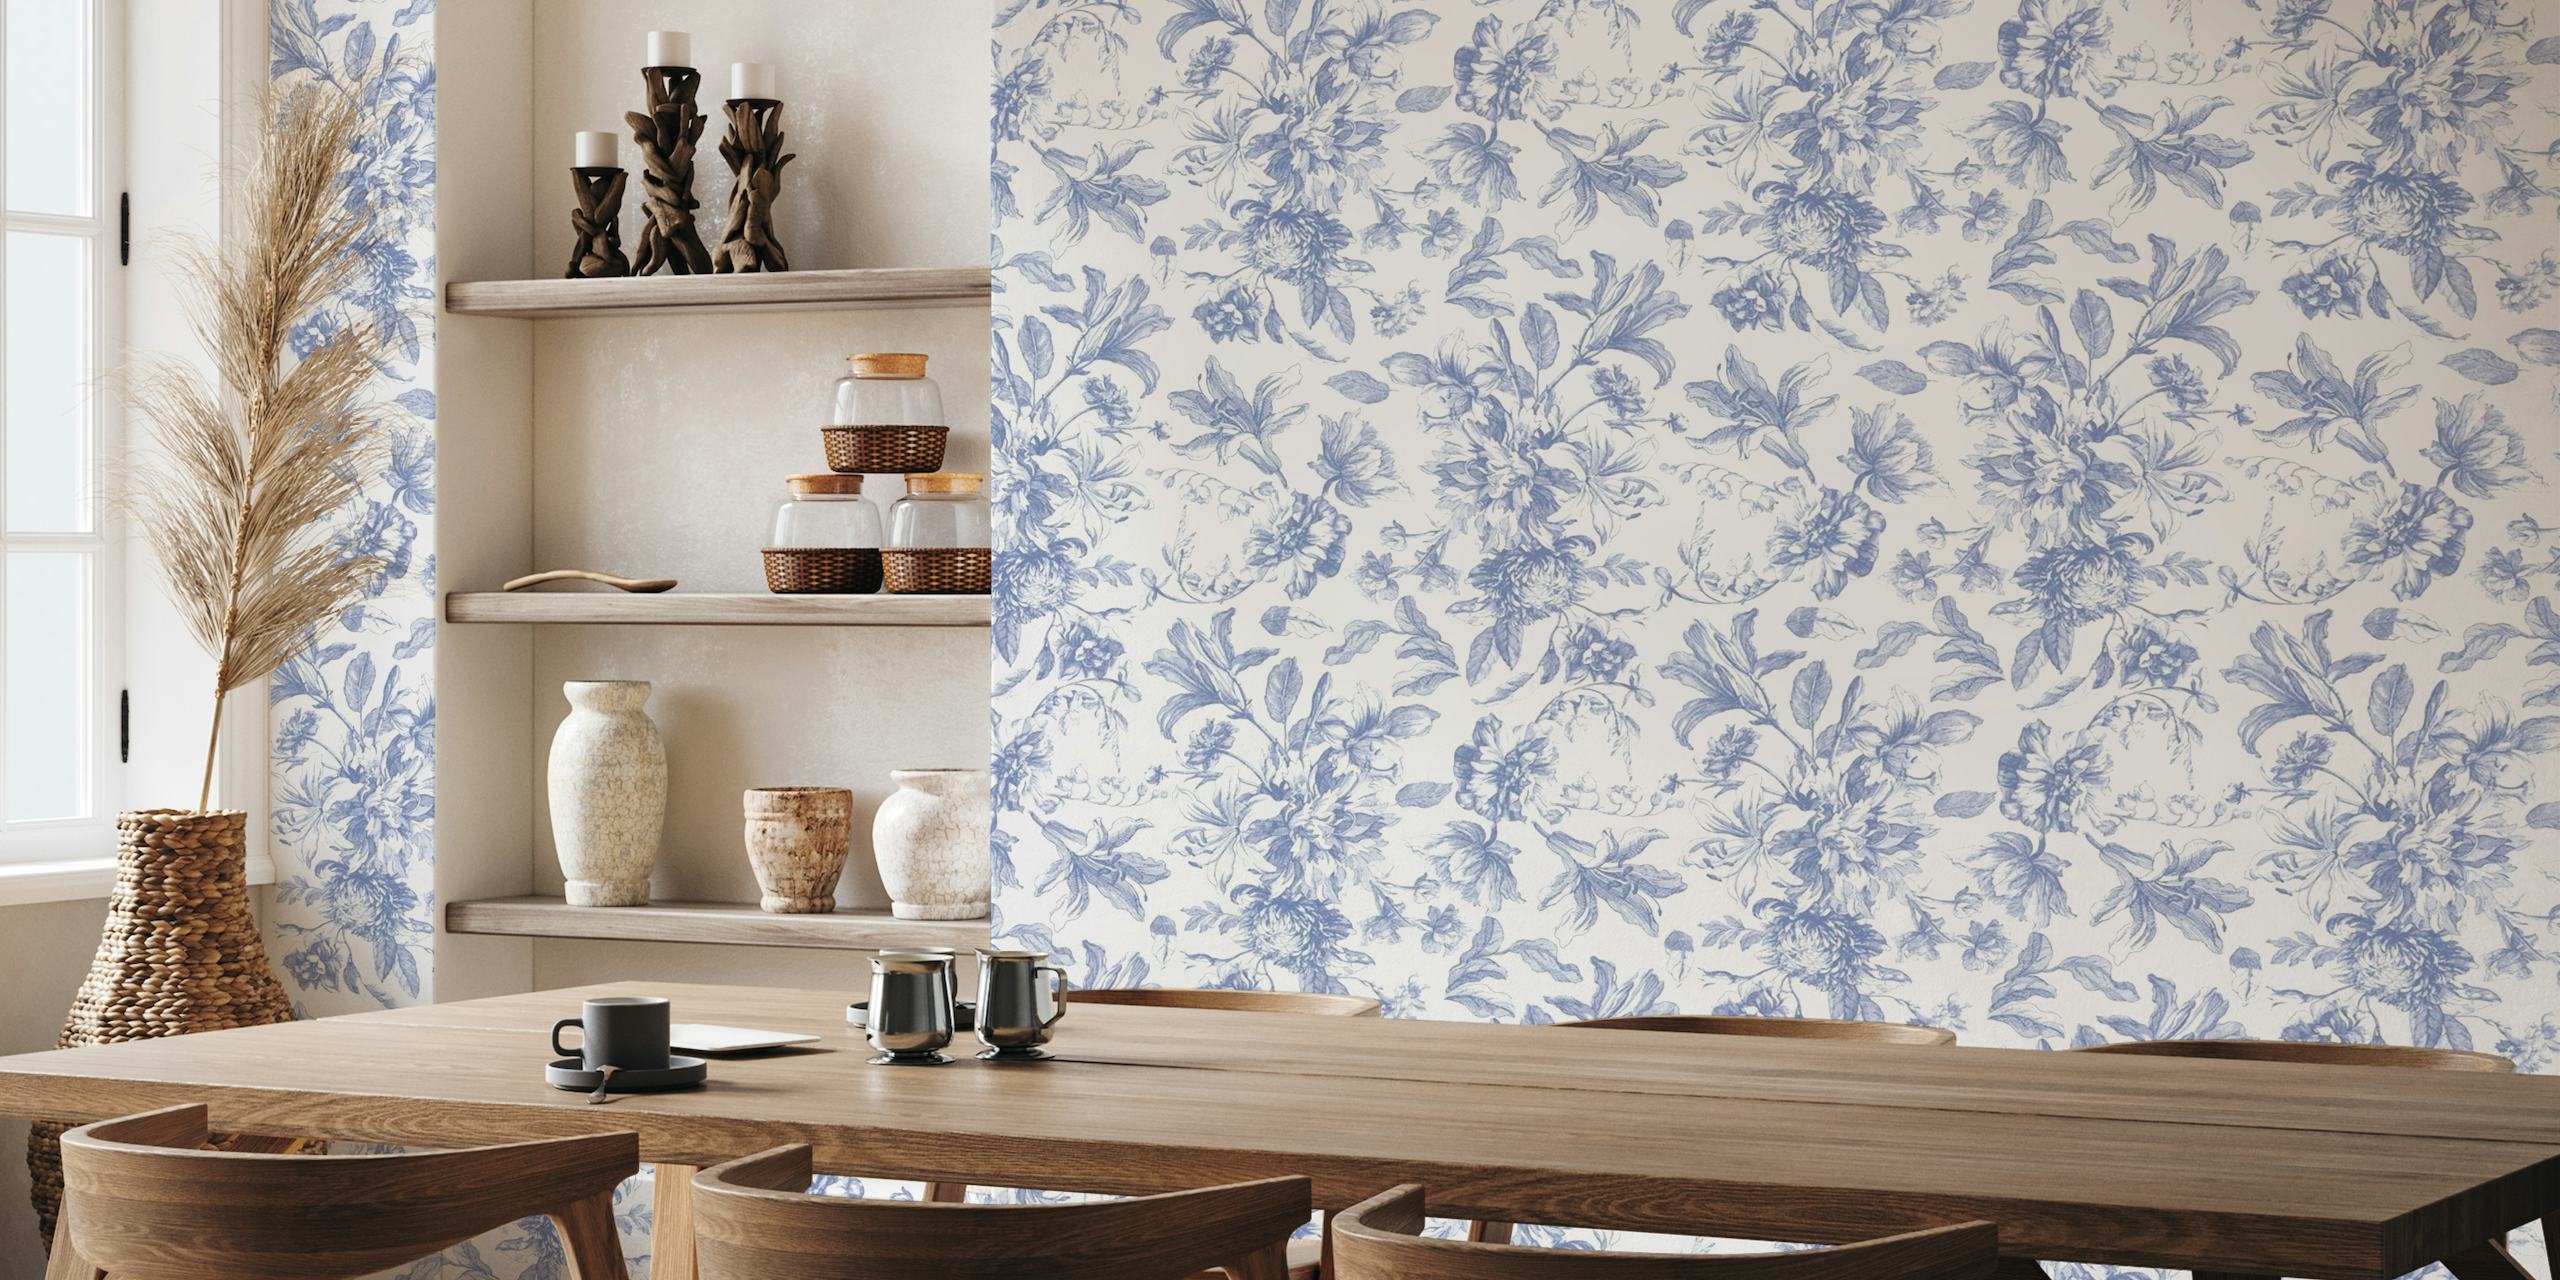 Elegant blue and white floral Toile De Jouy wall mural design